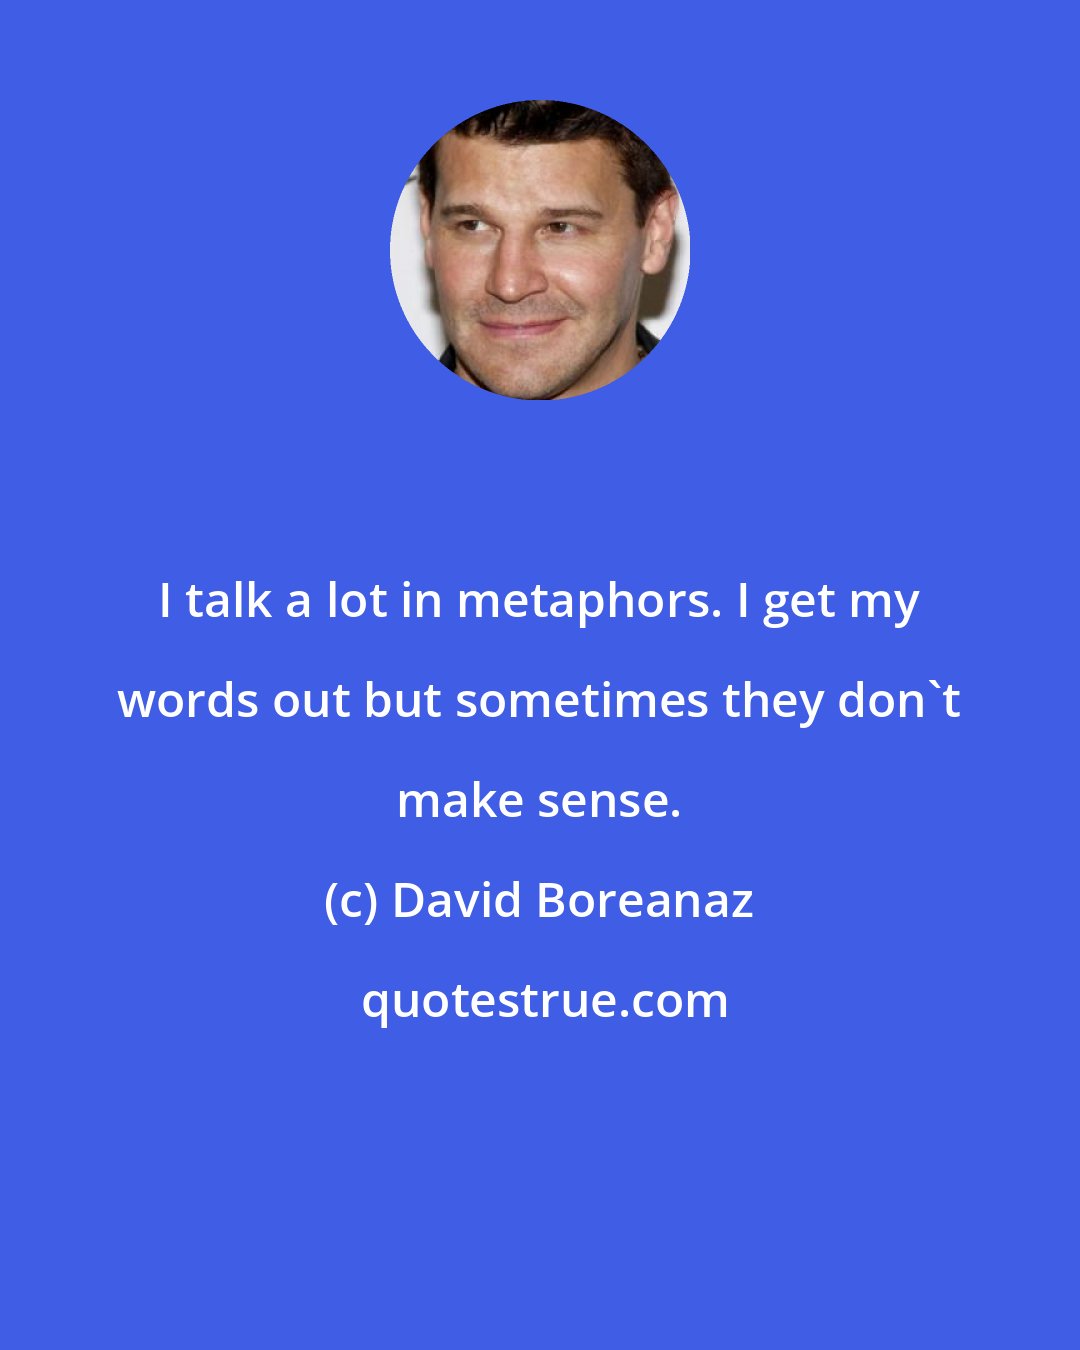 David Boreanaz: I talk a lot in metaphors. I get my words out but sometimes they don't make sense.